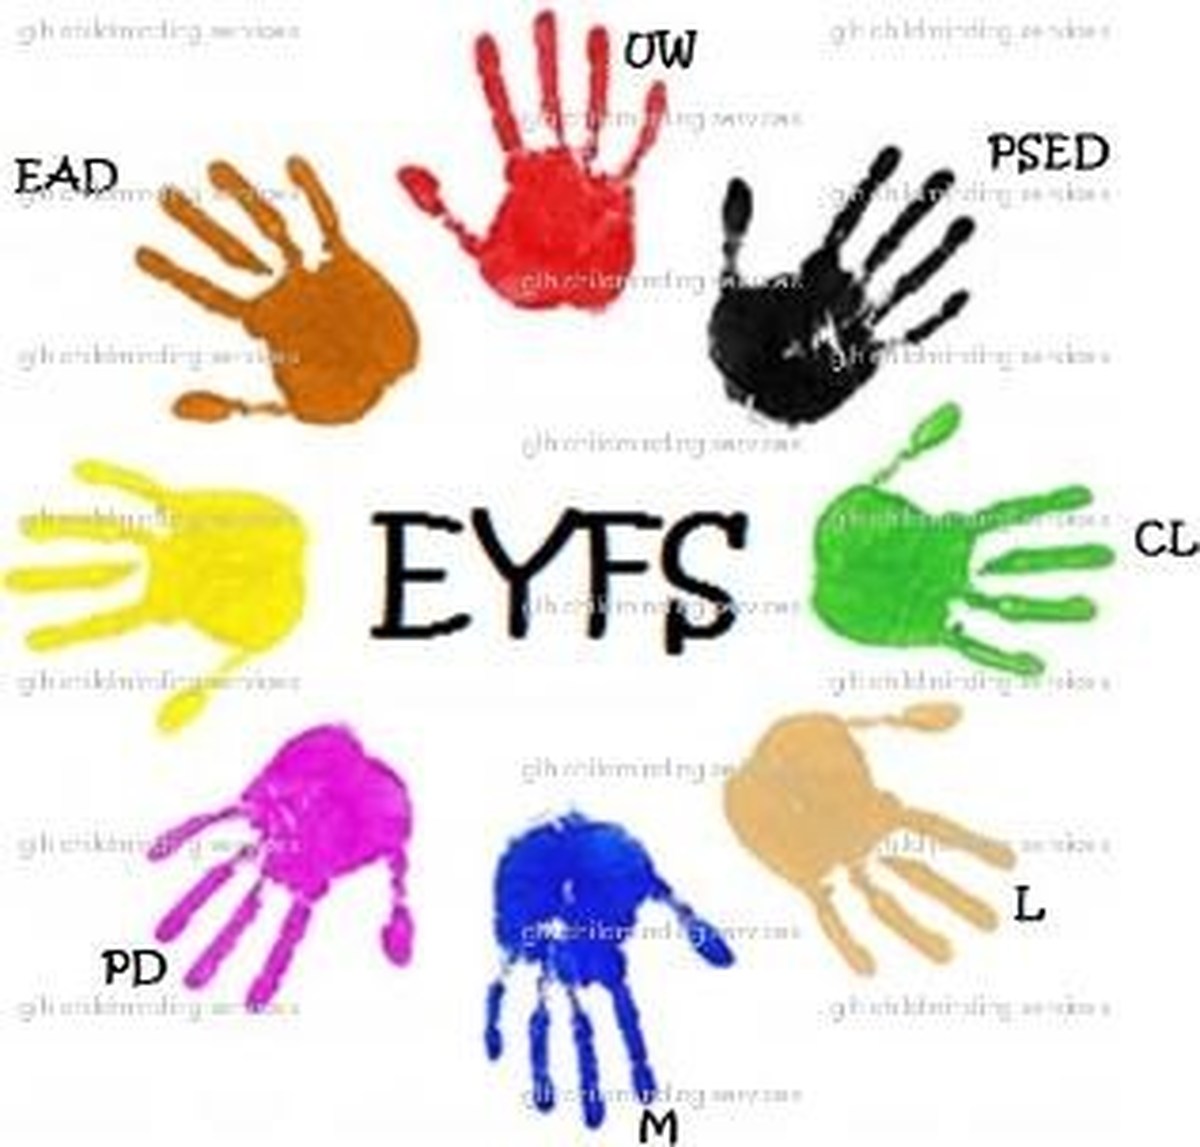 Welcome to the EYFS